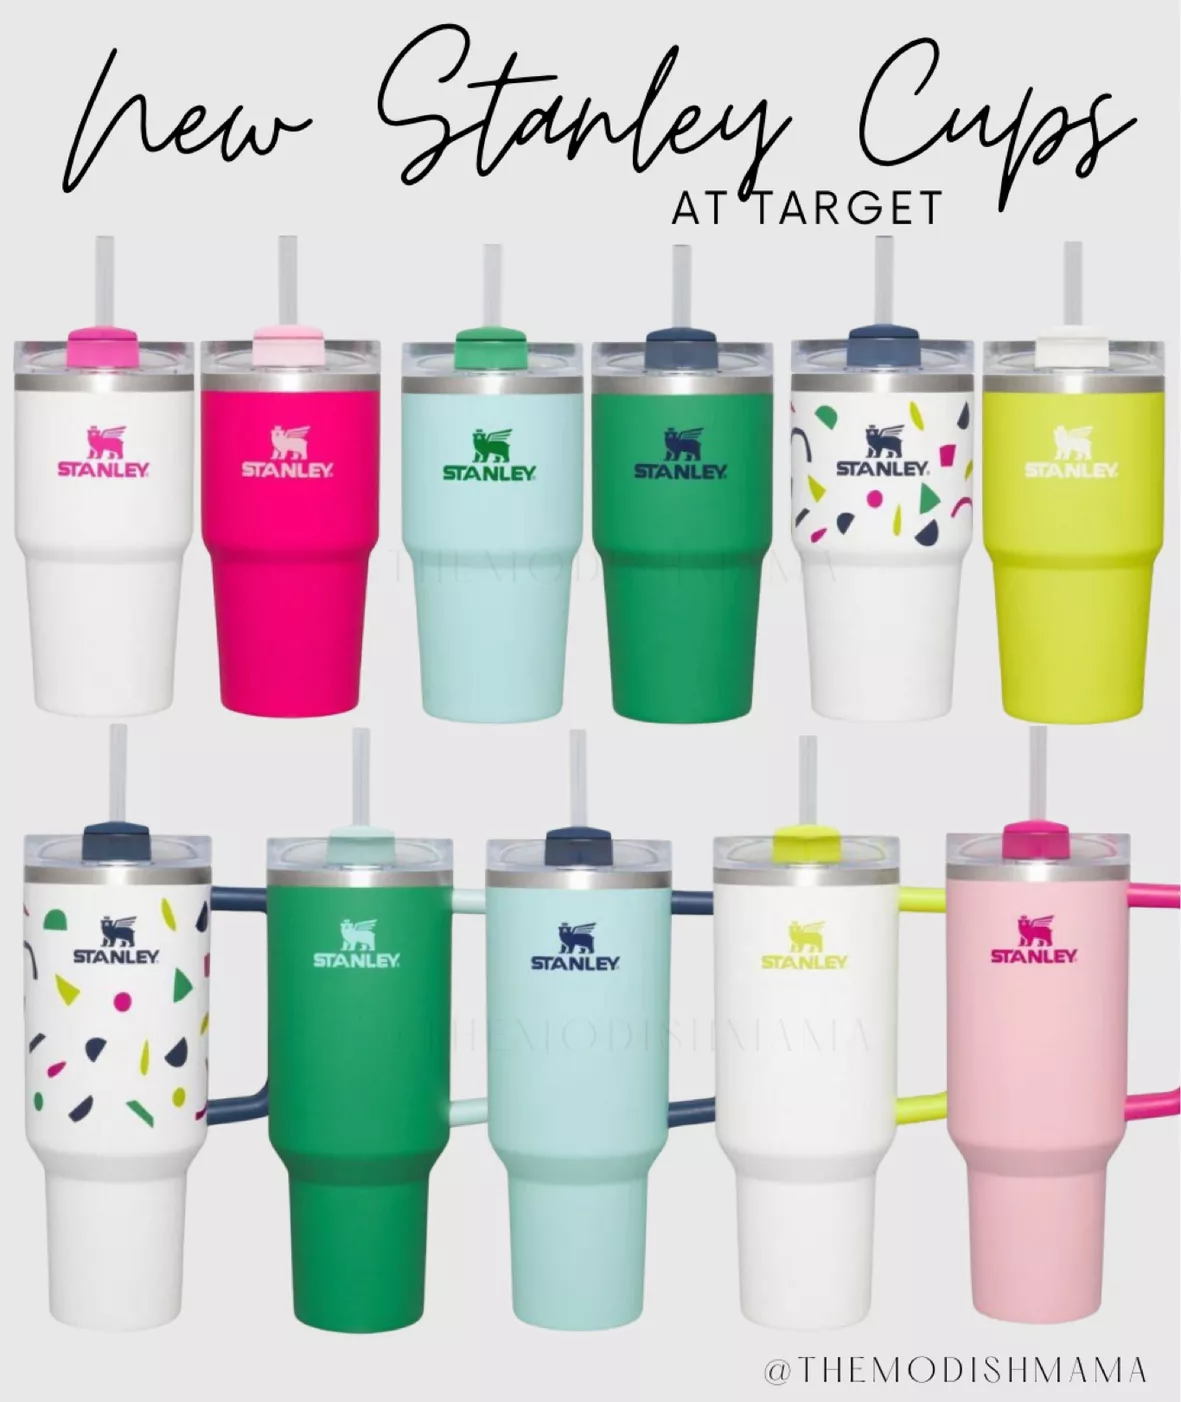 Have you seen the NEW Stanley cups for kids at Target?! I could